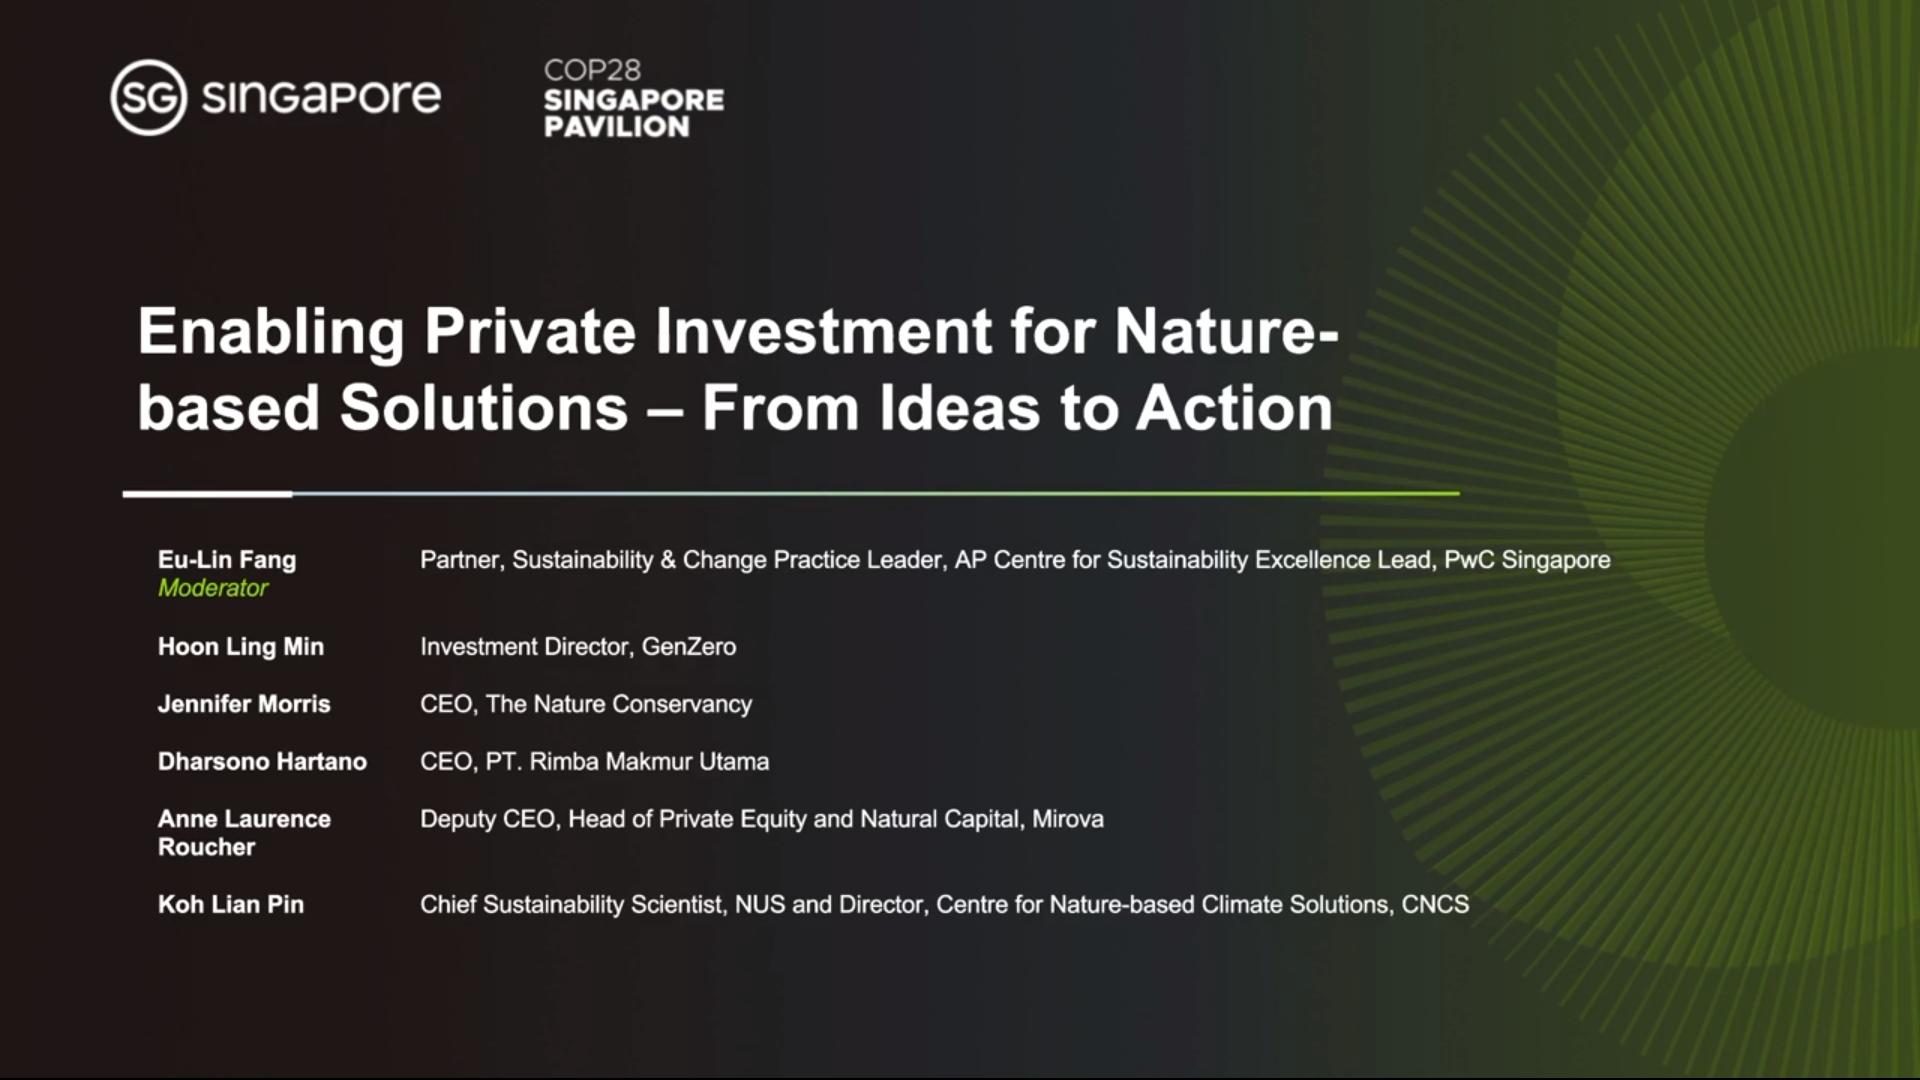 Enabling Private Investment for Nature-based Solutions - From Ideas to Action